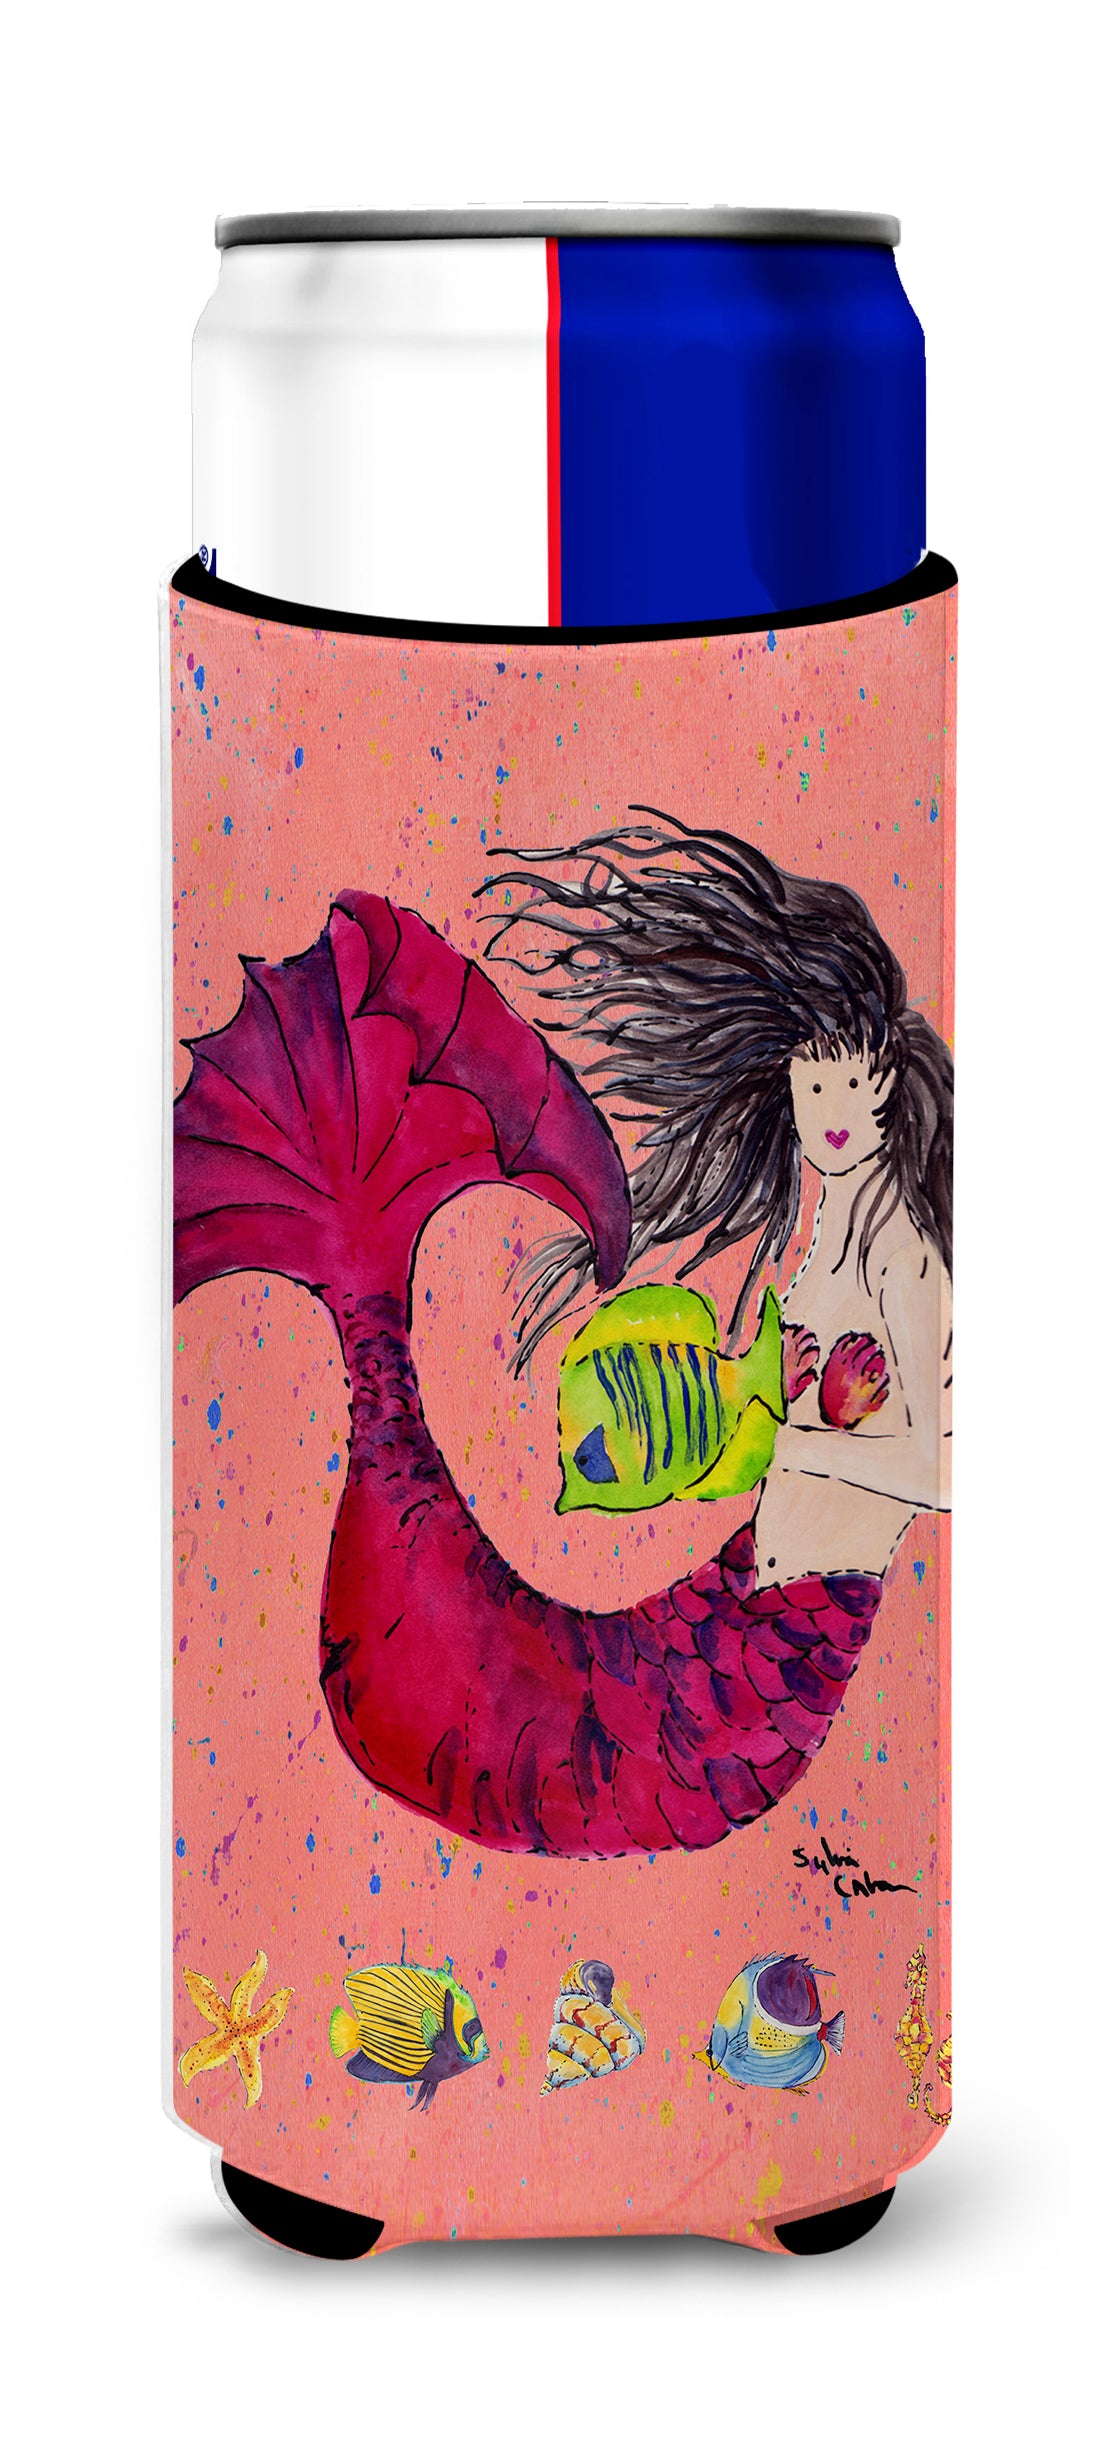 Black haired Mermaid on Red Ultra Beverage Insulators for slim cans 8338MUK.